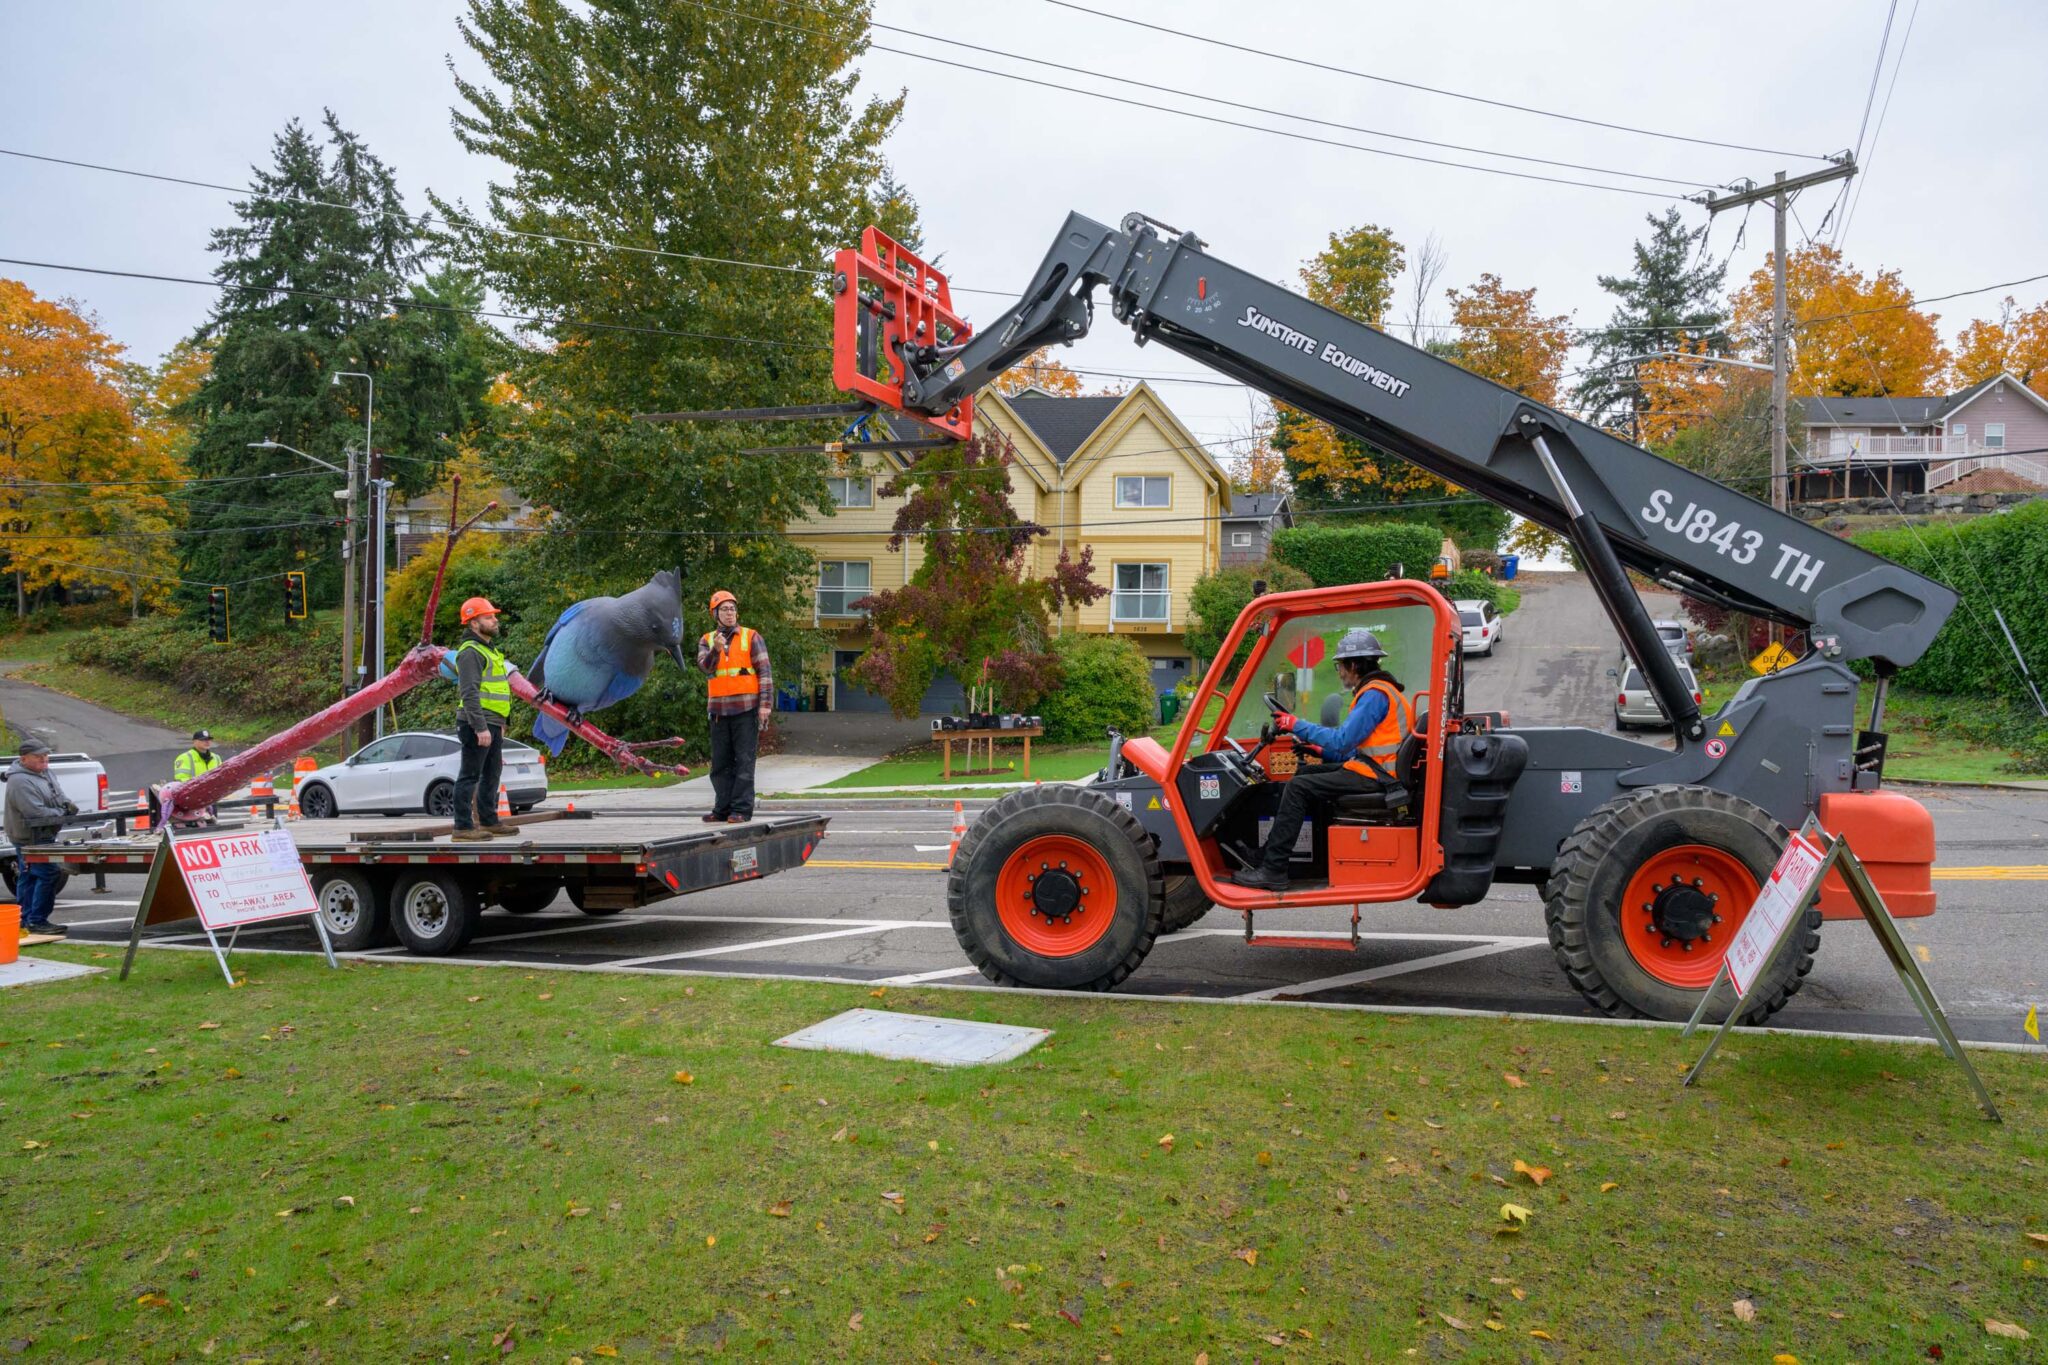 Workers use large heavy equipment to unload the art near a large grassy area with large trees and houses in the background.